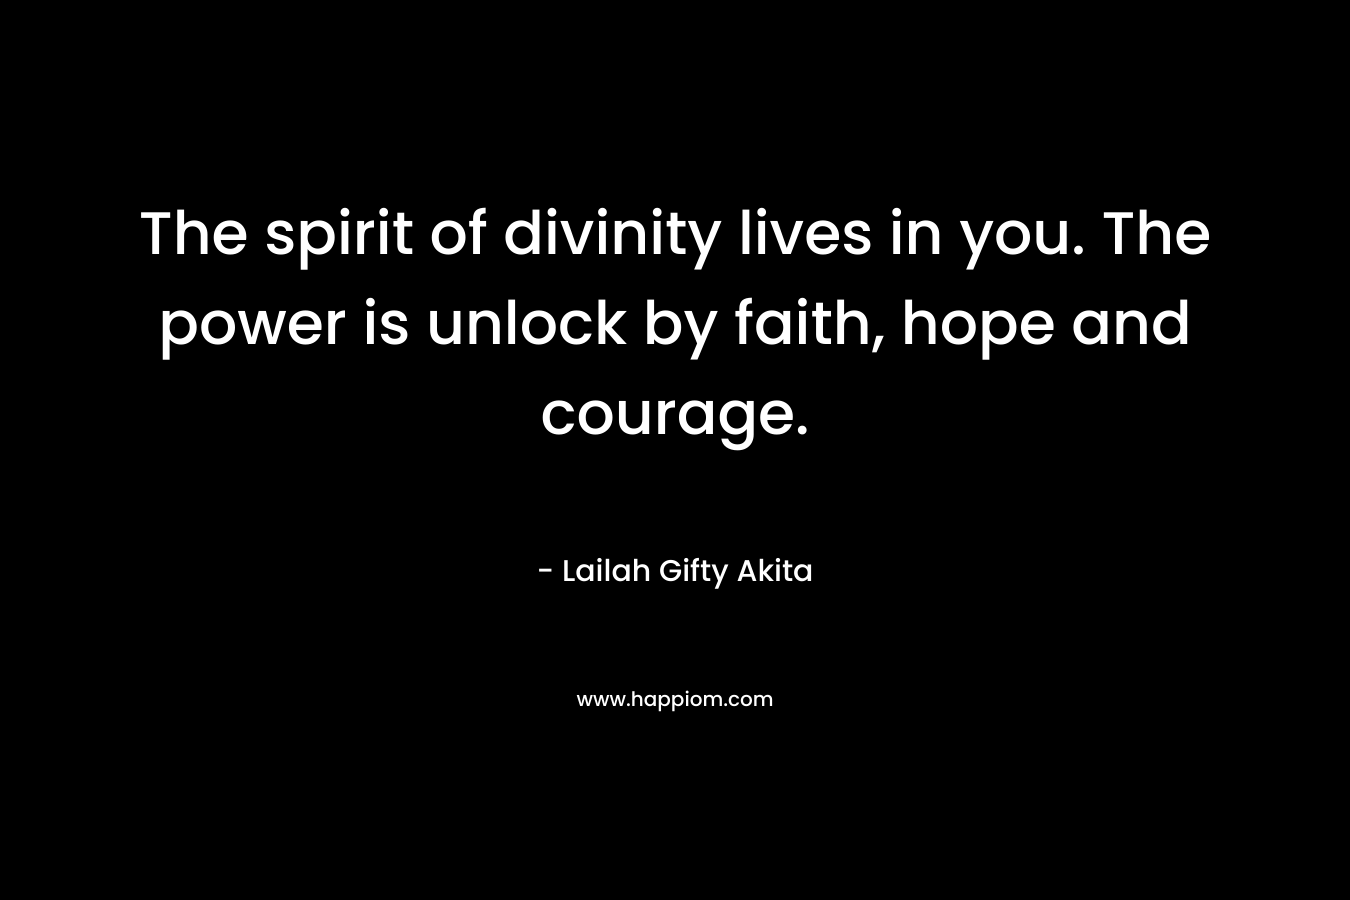 The spirit of divinity lives in you. The power is unlock by faith, hope and courage.